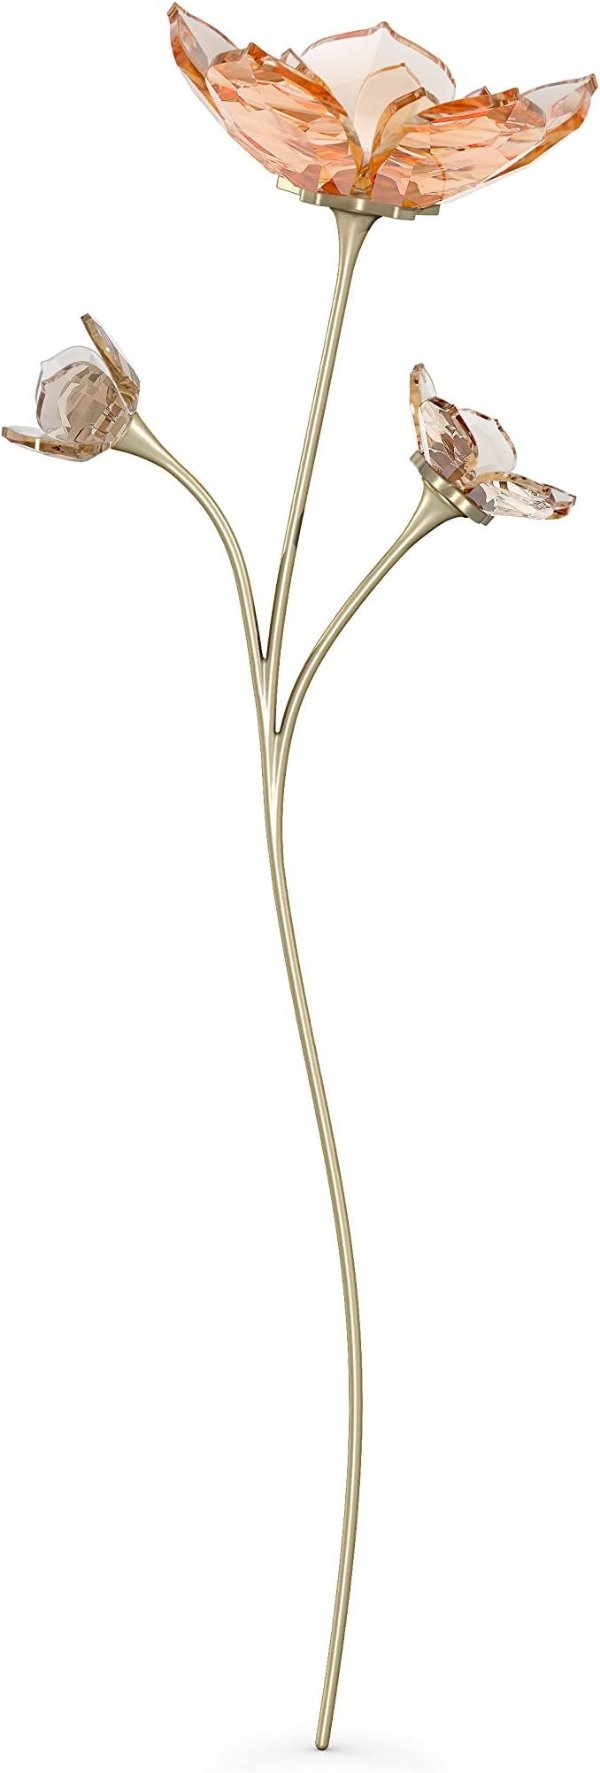 Garden Tales Magnolia Single Flower, BeigeCrystal Petals with a Gold-Tone Finish Stem, Part of theGarden Tales Collection